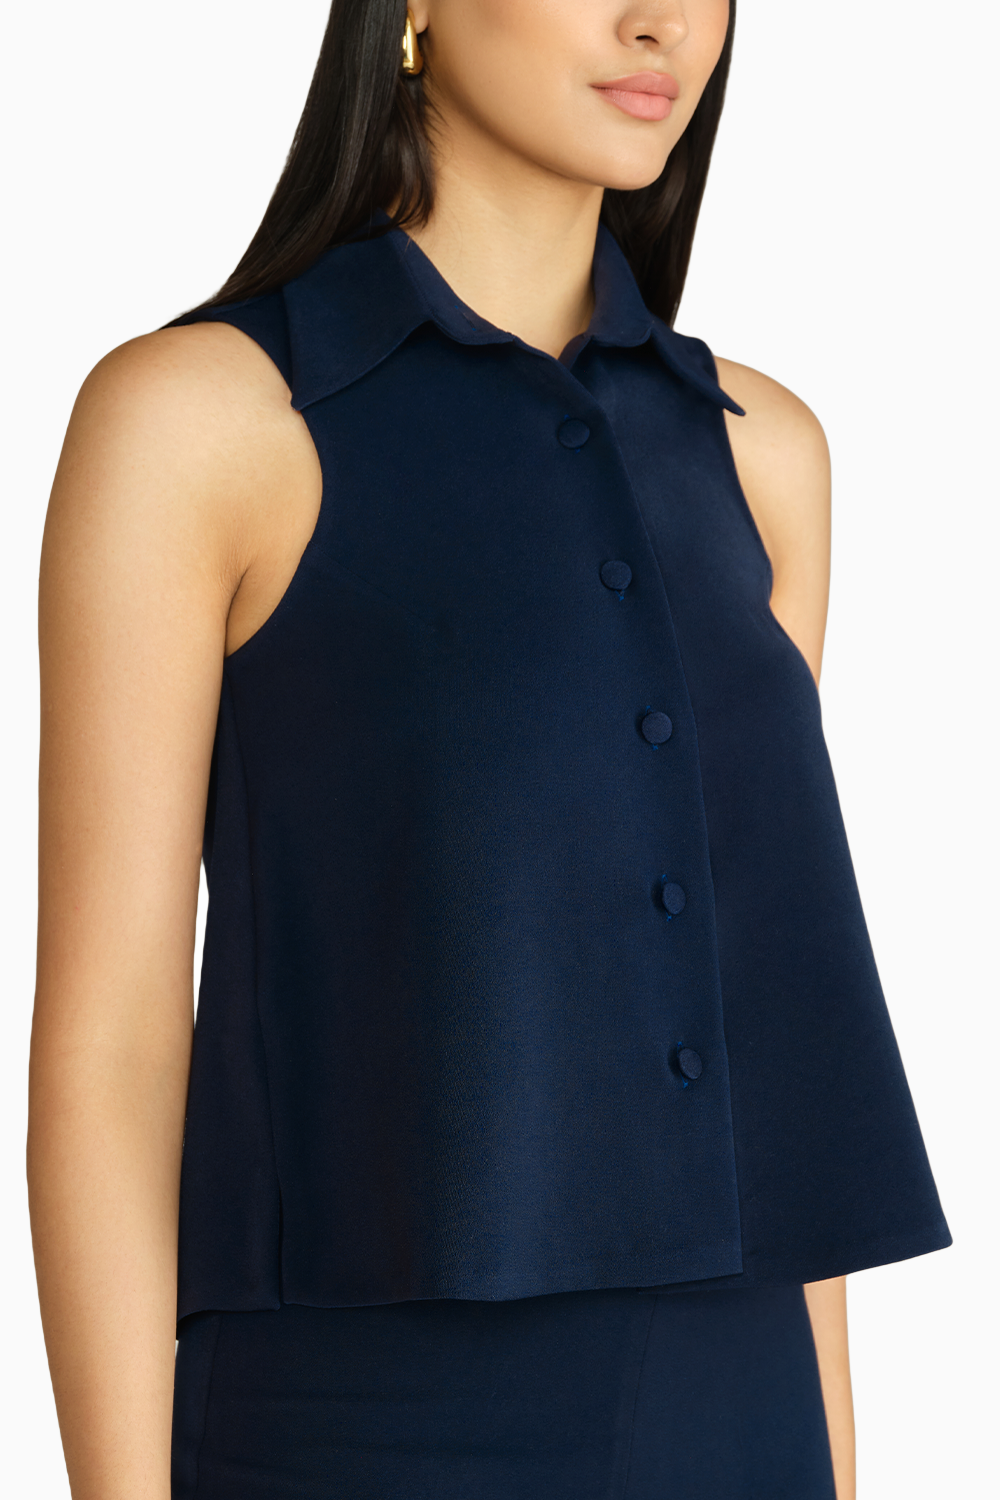 Navy Blue Stretch Suiting Sleeveless Top